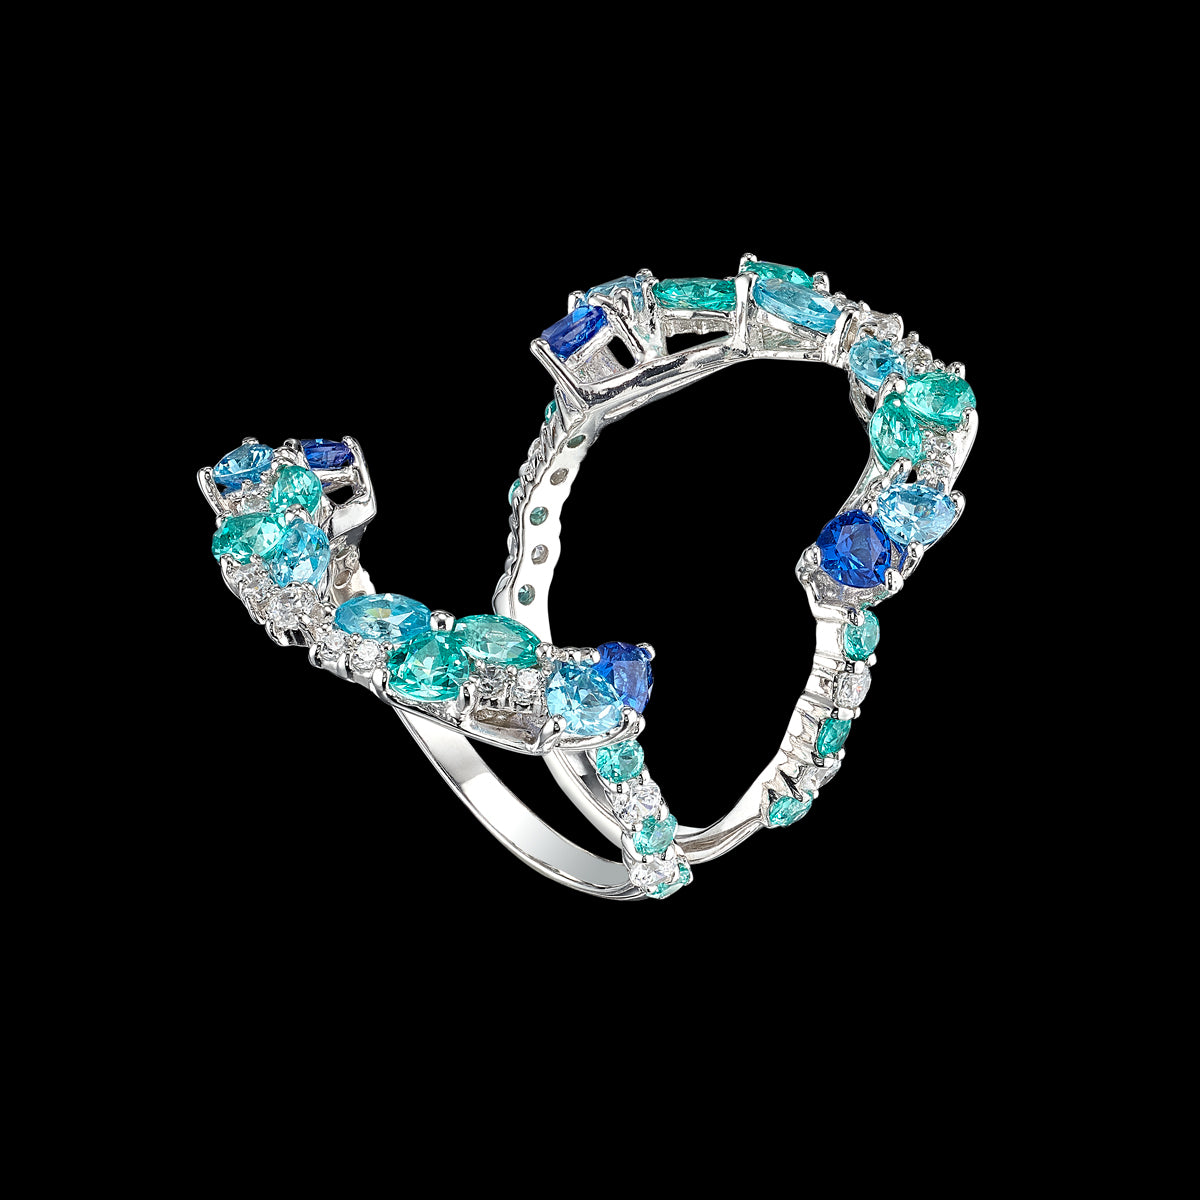 Paraiba Opal Ocean Rings, Ring, Anabela Chan Joaillerie - Fine jewelry with laboratory grown and created gemstones hand-crafted in the United Kingdom. Anabela Chan Joaillerie is the first fine jewellery brand in the world to champion laboratory-grown and created gemstones with high jewellery design, artisanal craftsmanship and a focus on ethical and sustainable innovations.